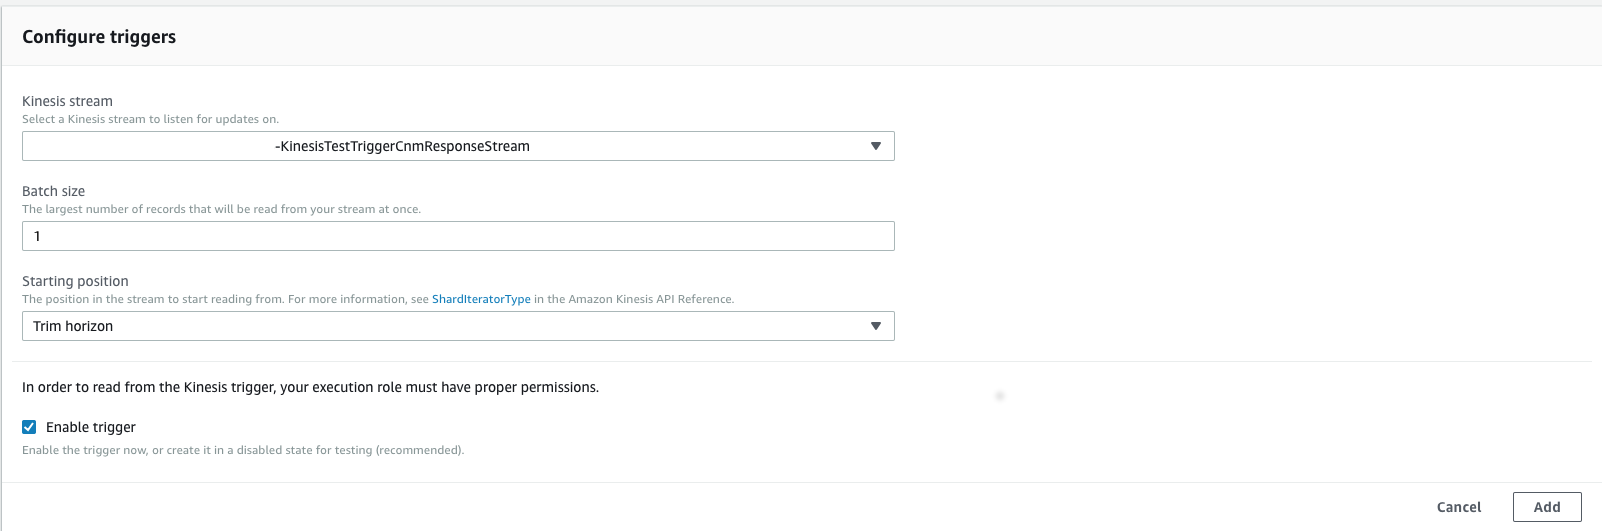 Screenshot of the AWS console showing configuration for Kinesis stream trigger on KinesisOutboundEventLogger Lambda